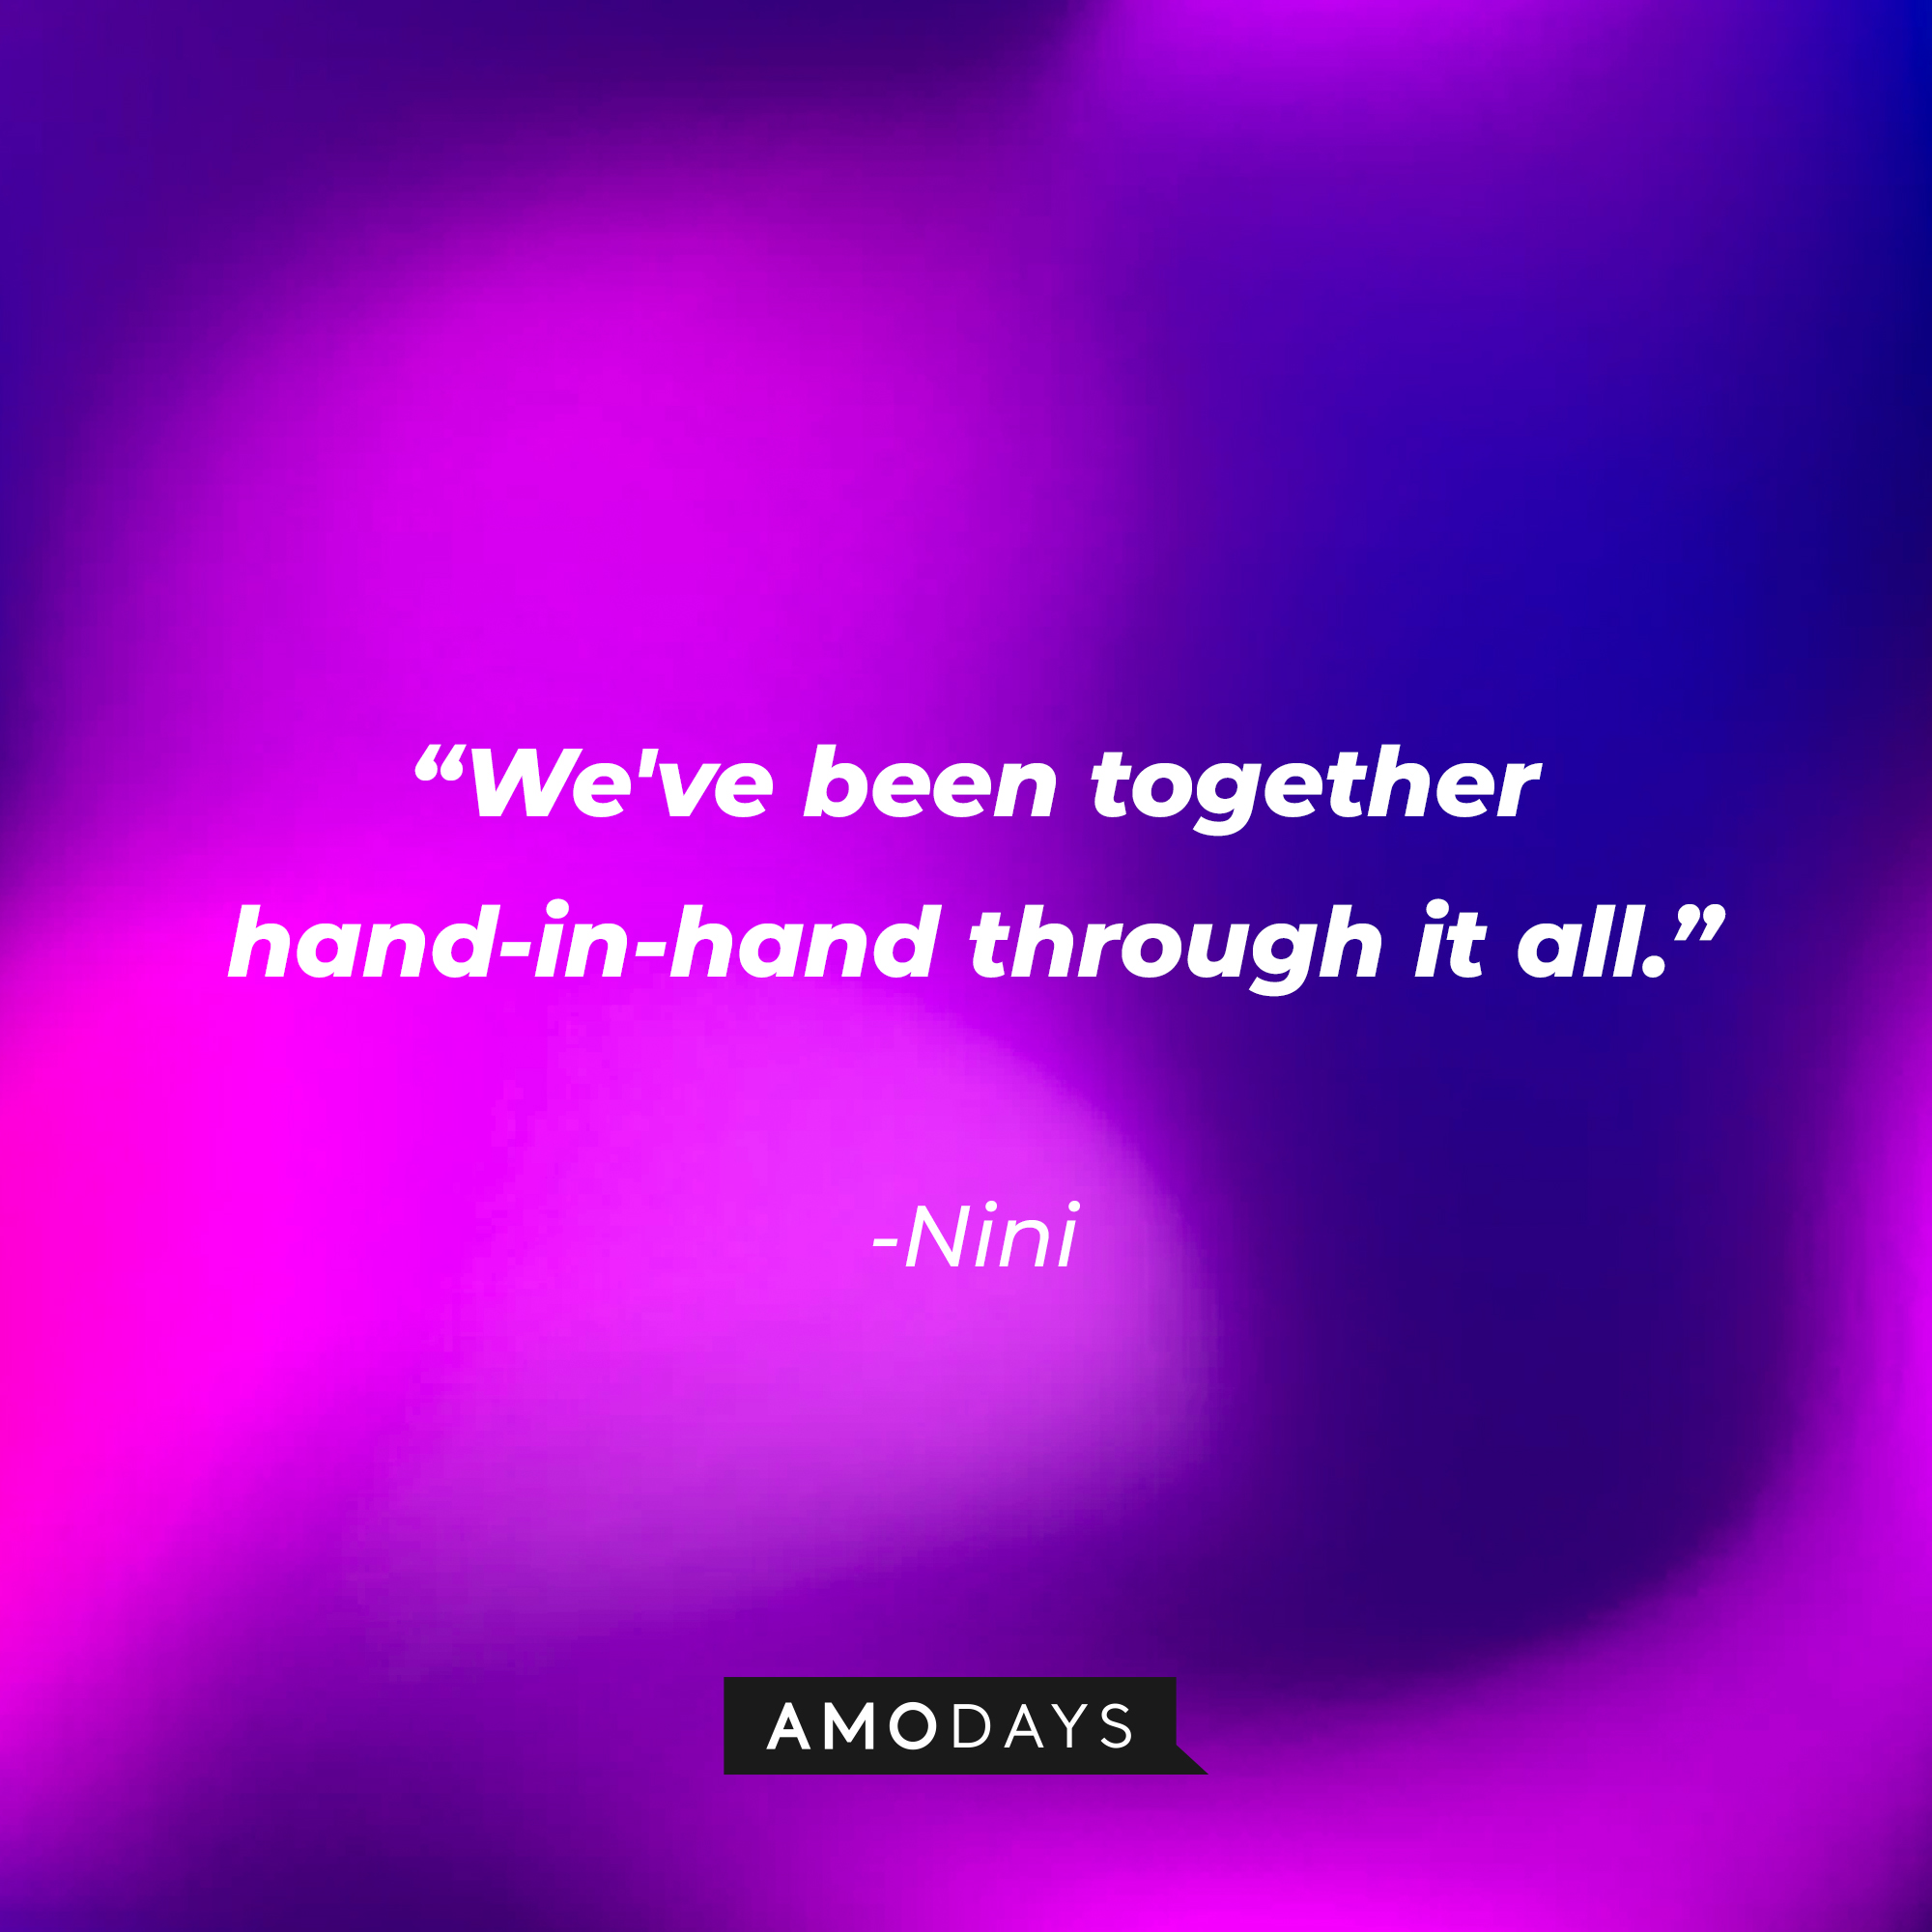 Nini’s quote: "We've been together hand-in-hand through it all." | Source: AmoDays